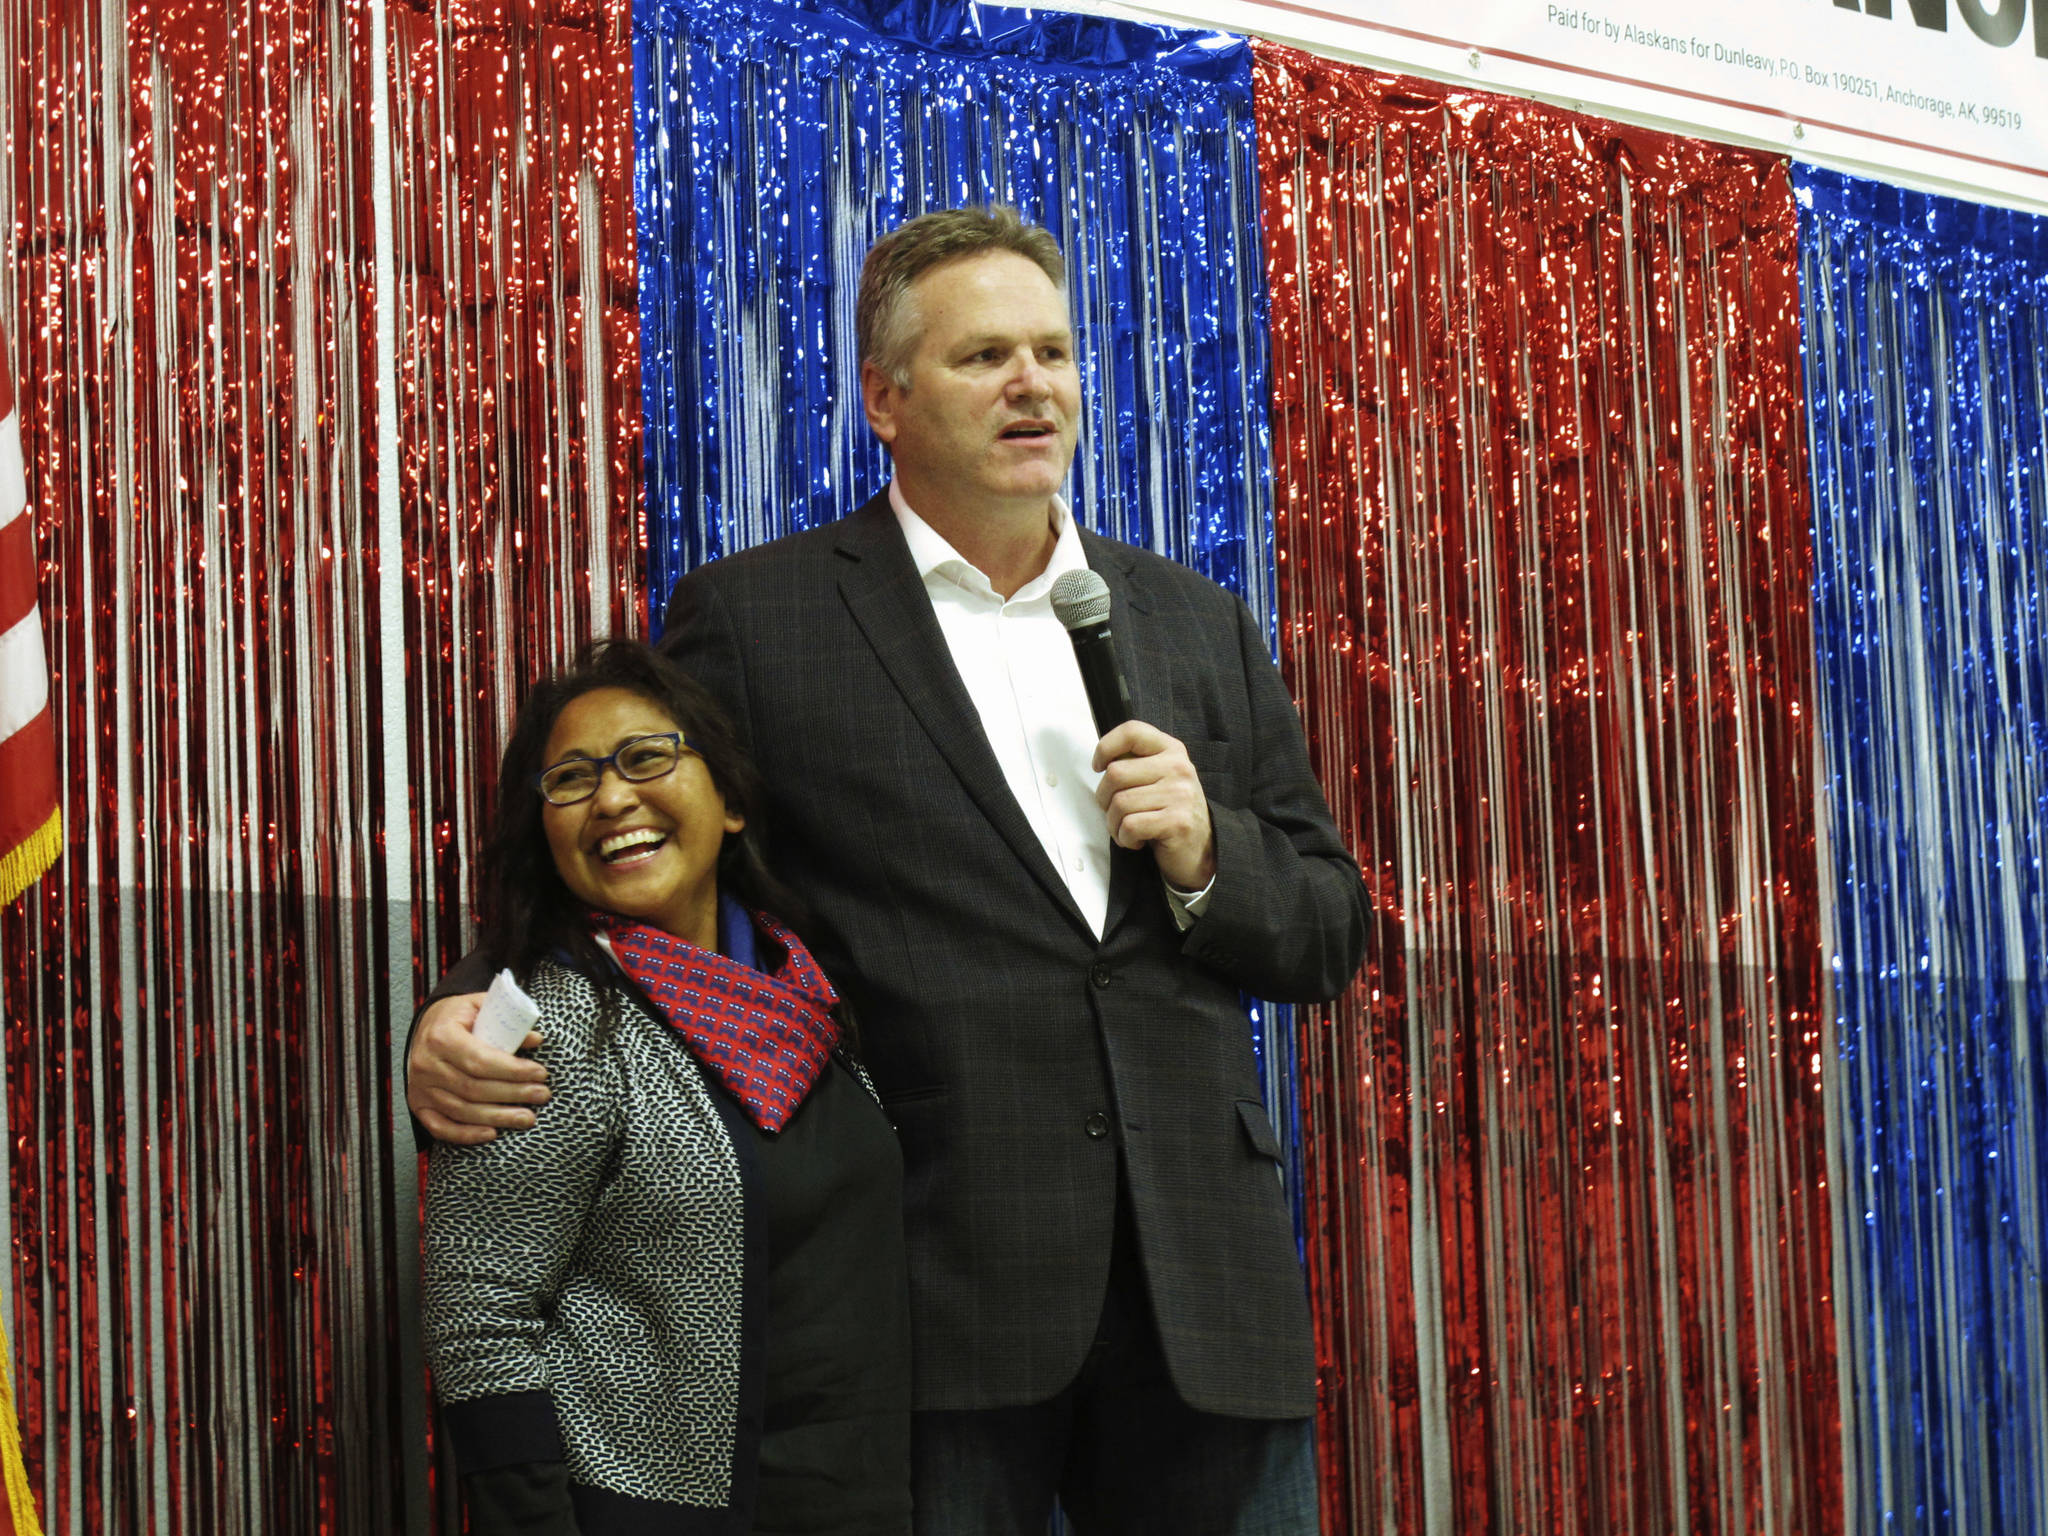 In this Nov. 4 photo, Alaska Republican gubernatorial candidate Mike Dunleavy stands with his wife, Rose, on stage during a GOP rally in Anchorage. For the first time ever, a U.S. governor will be sworn into office above the Arctic Circle. Dunleavy will become Alaska’s top elected official Dec. 3, when he takes the oath of office in Noorvik, a tiny Inupiat Eskimo village above the Arctic Circle and more than a thousand miles from the state capital of Juneau. (Becky Bohrer | Associated Press)